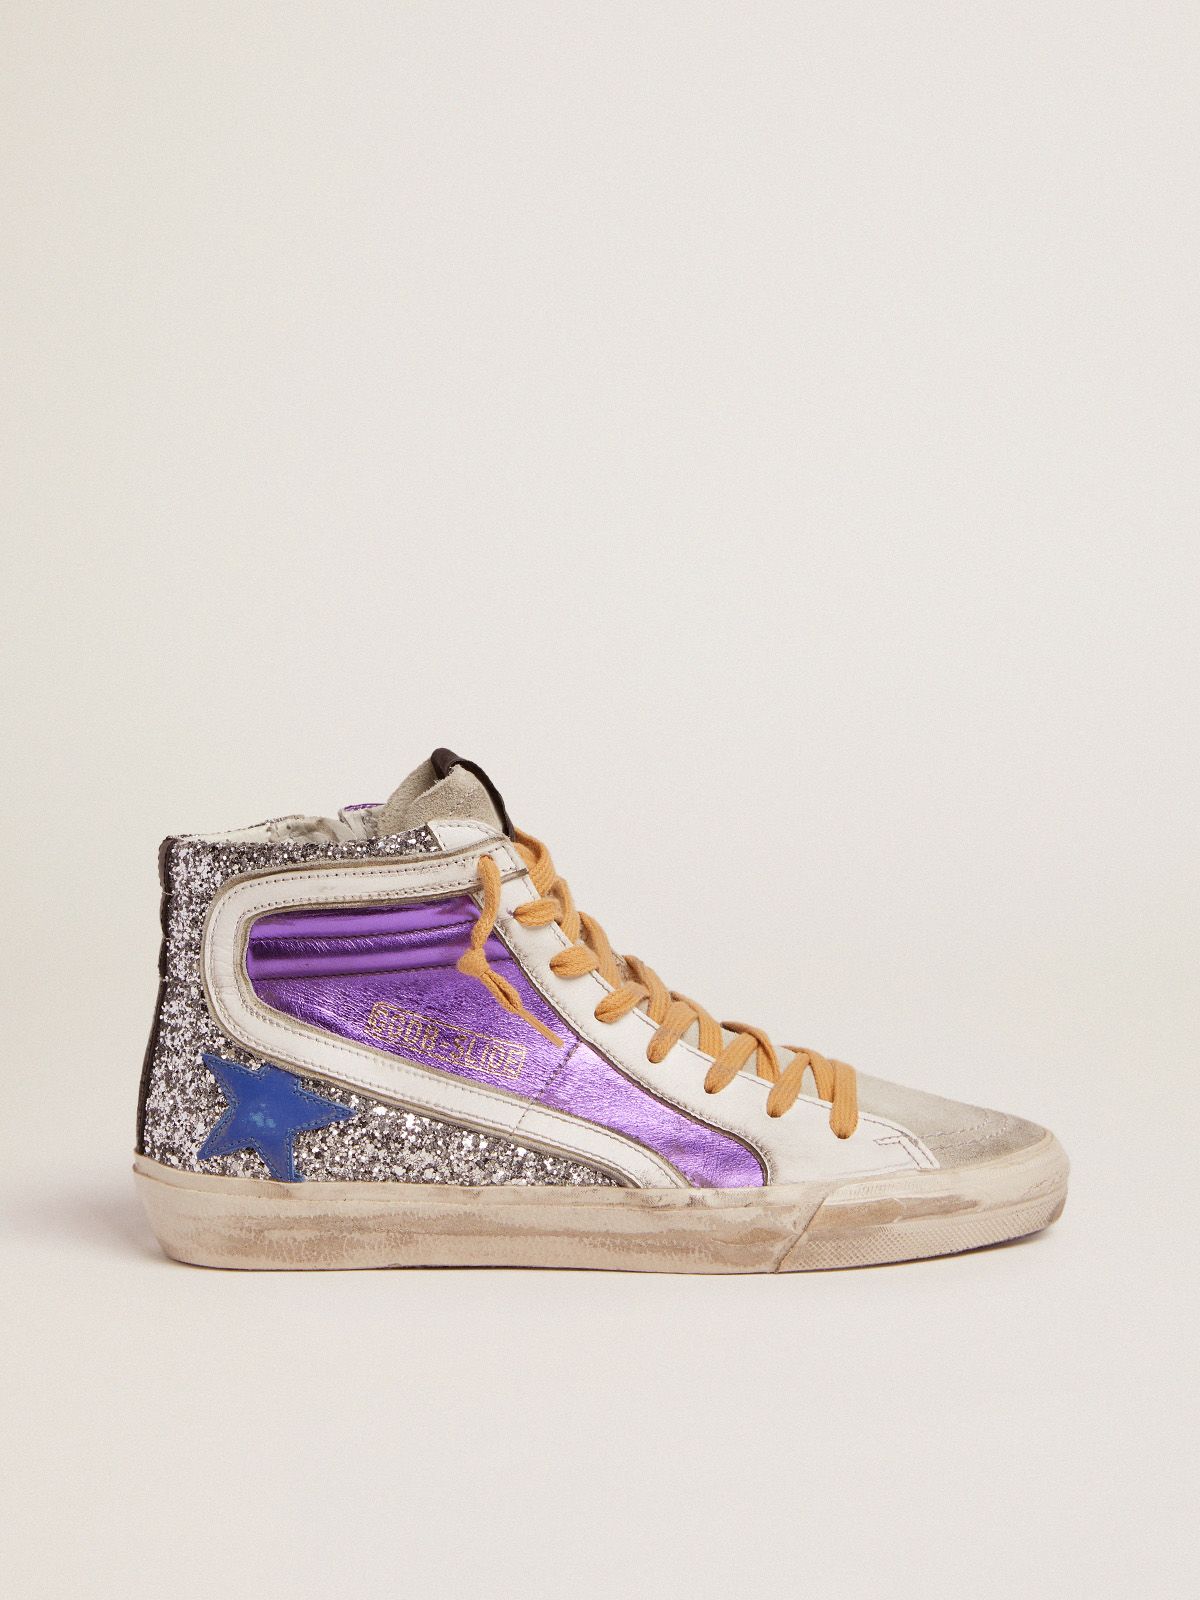 golden goose with purple glitter upper leather Slide and sneakers laminated silver